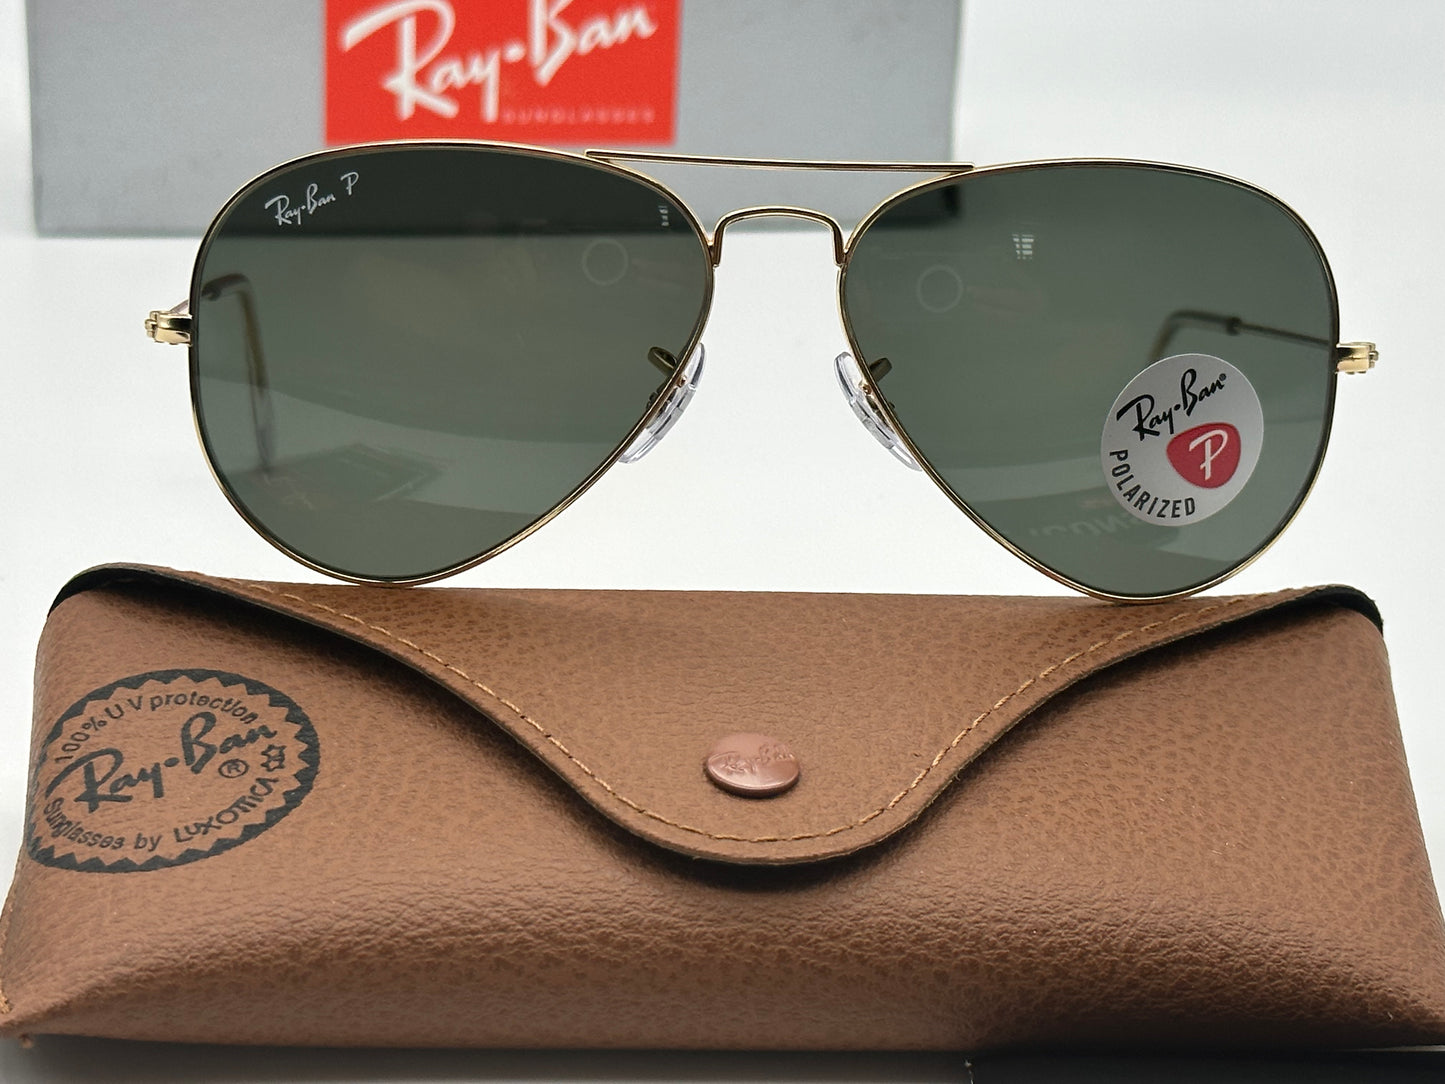 Ray Ban Aviator Polarized 58mm G-15 RB 3025 001/58 3P Green / Gold Made in Italy NEW